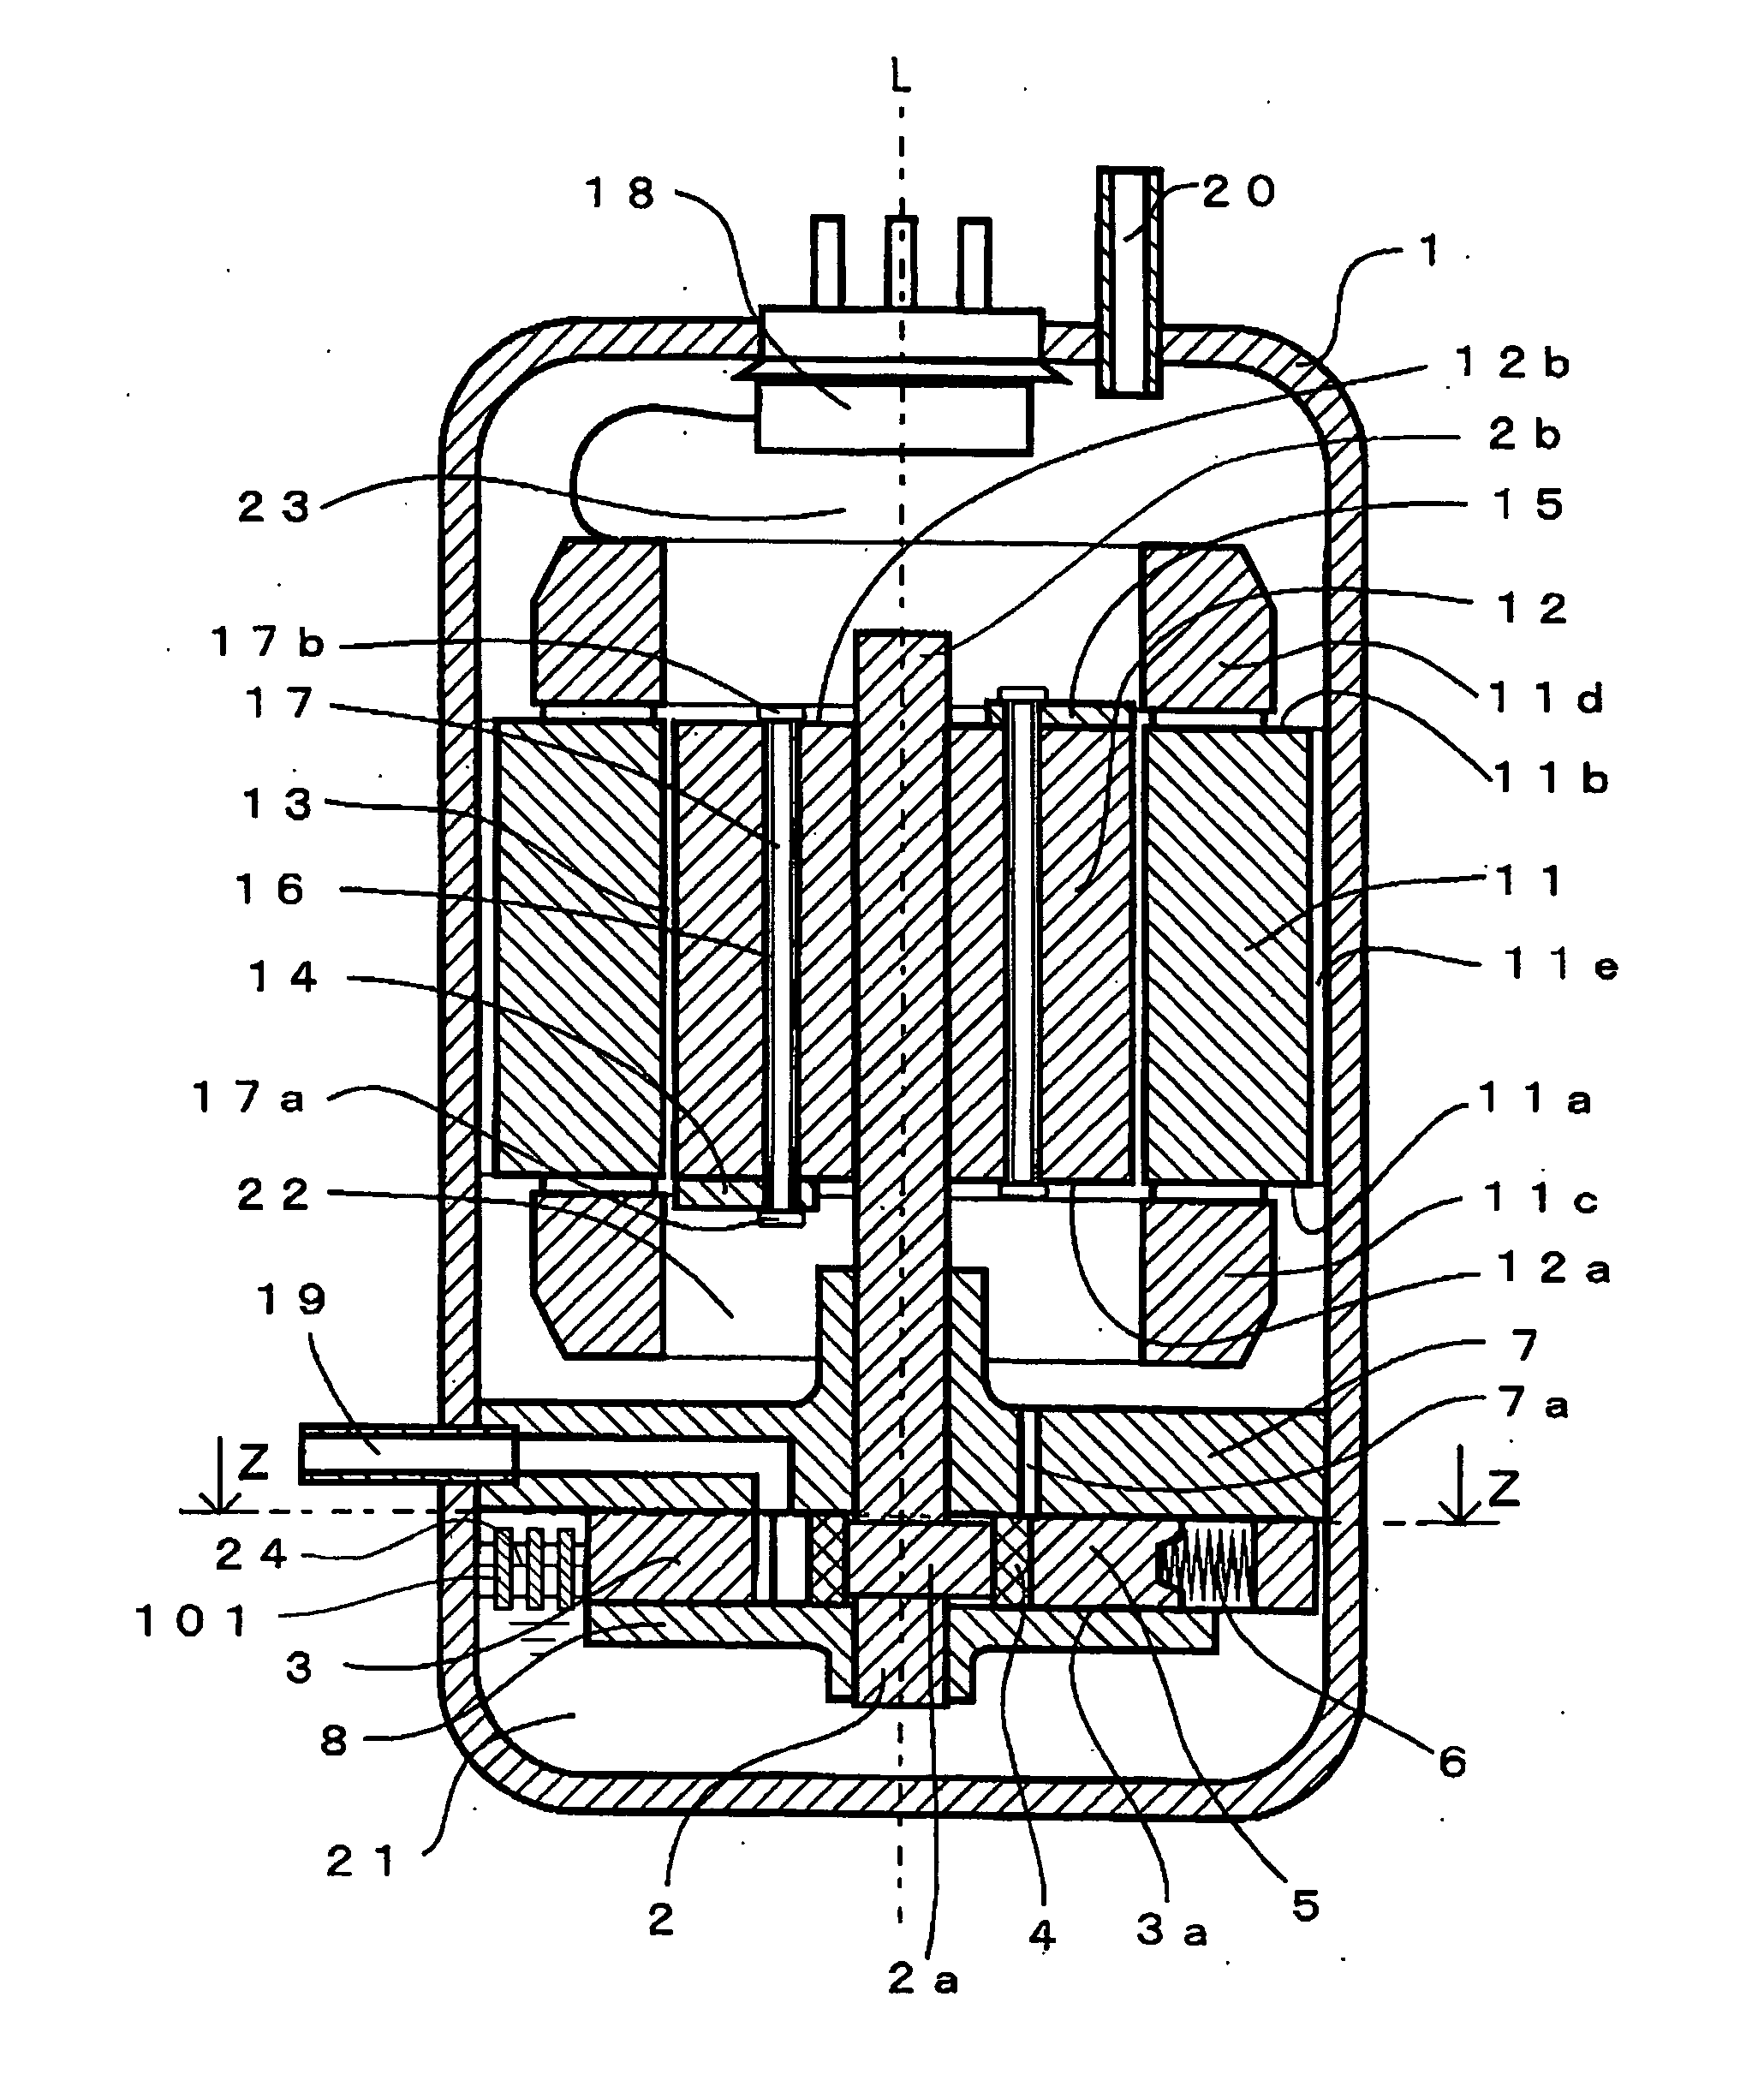 Hermetic type compressor with wave-suppressing member in the oil reservoir